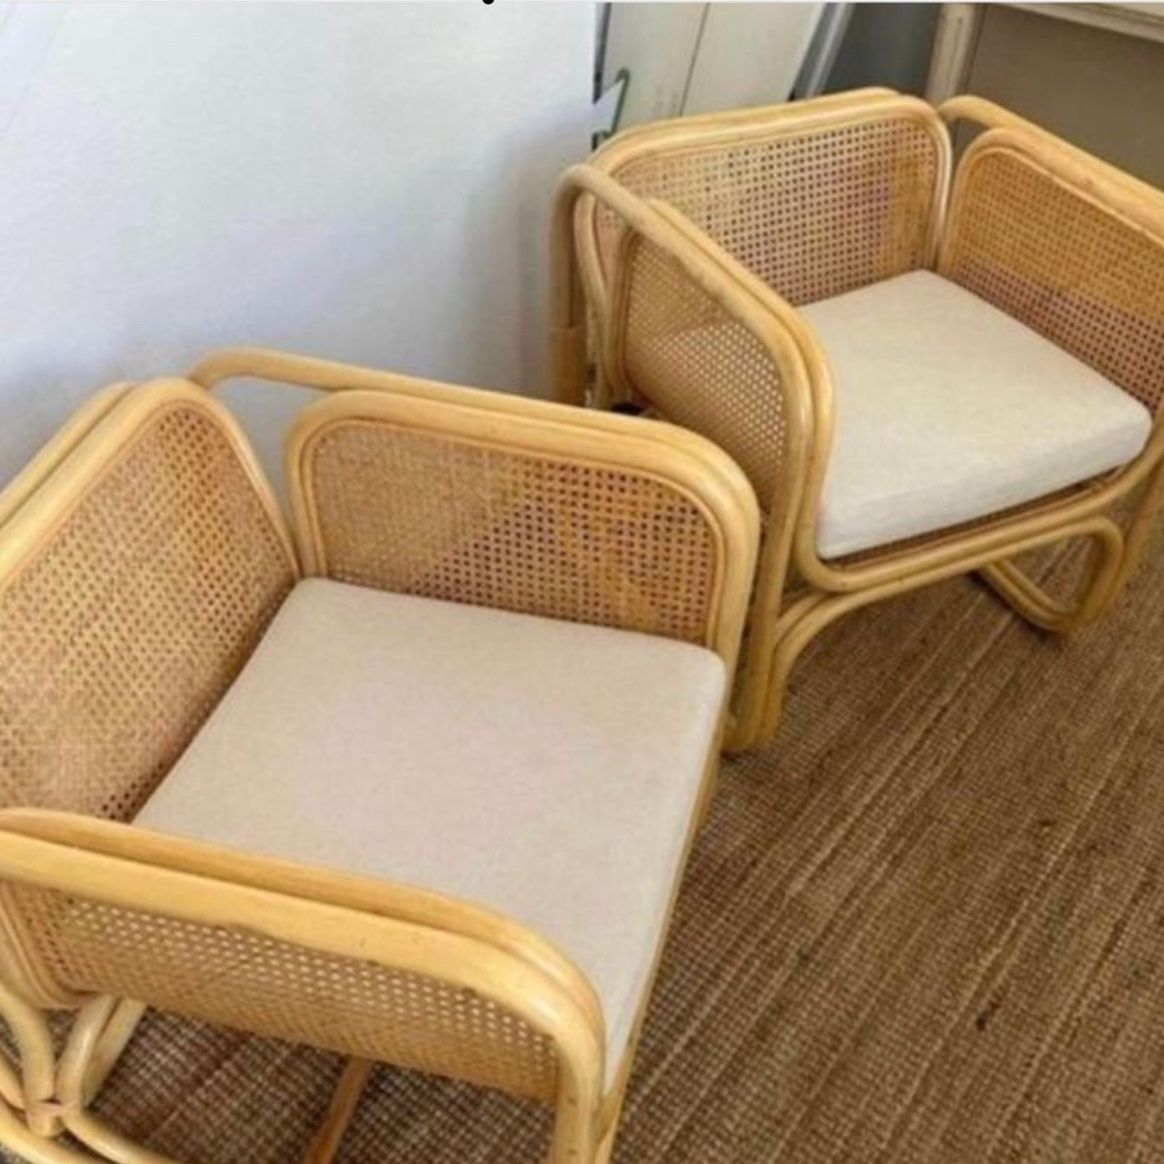 Pair of Vintage Caned Chairs with Cream Cushions [OPEN TO OFFERS]